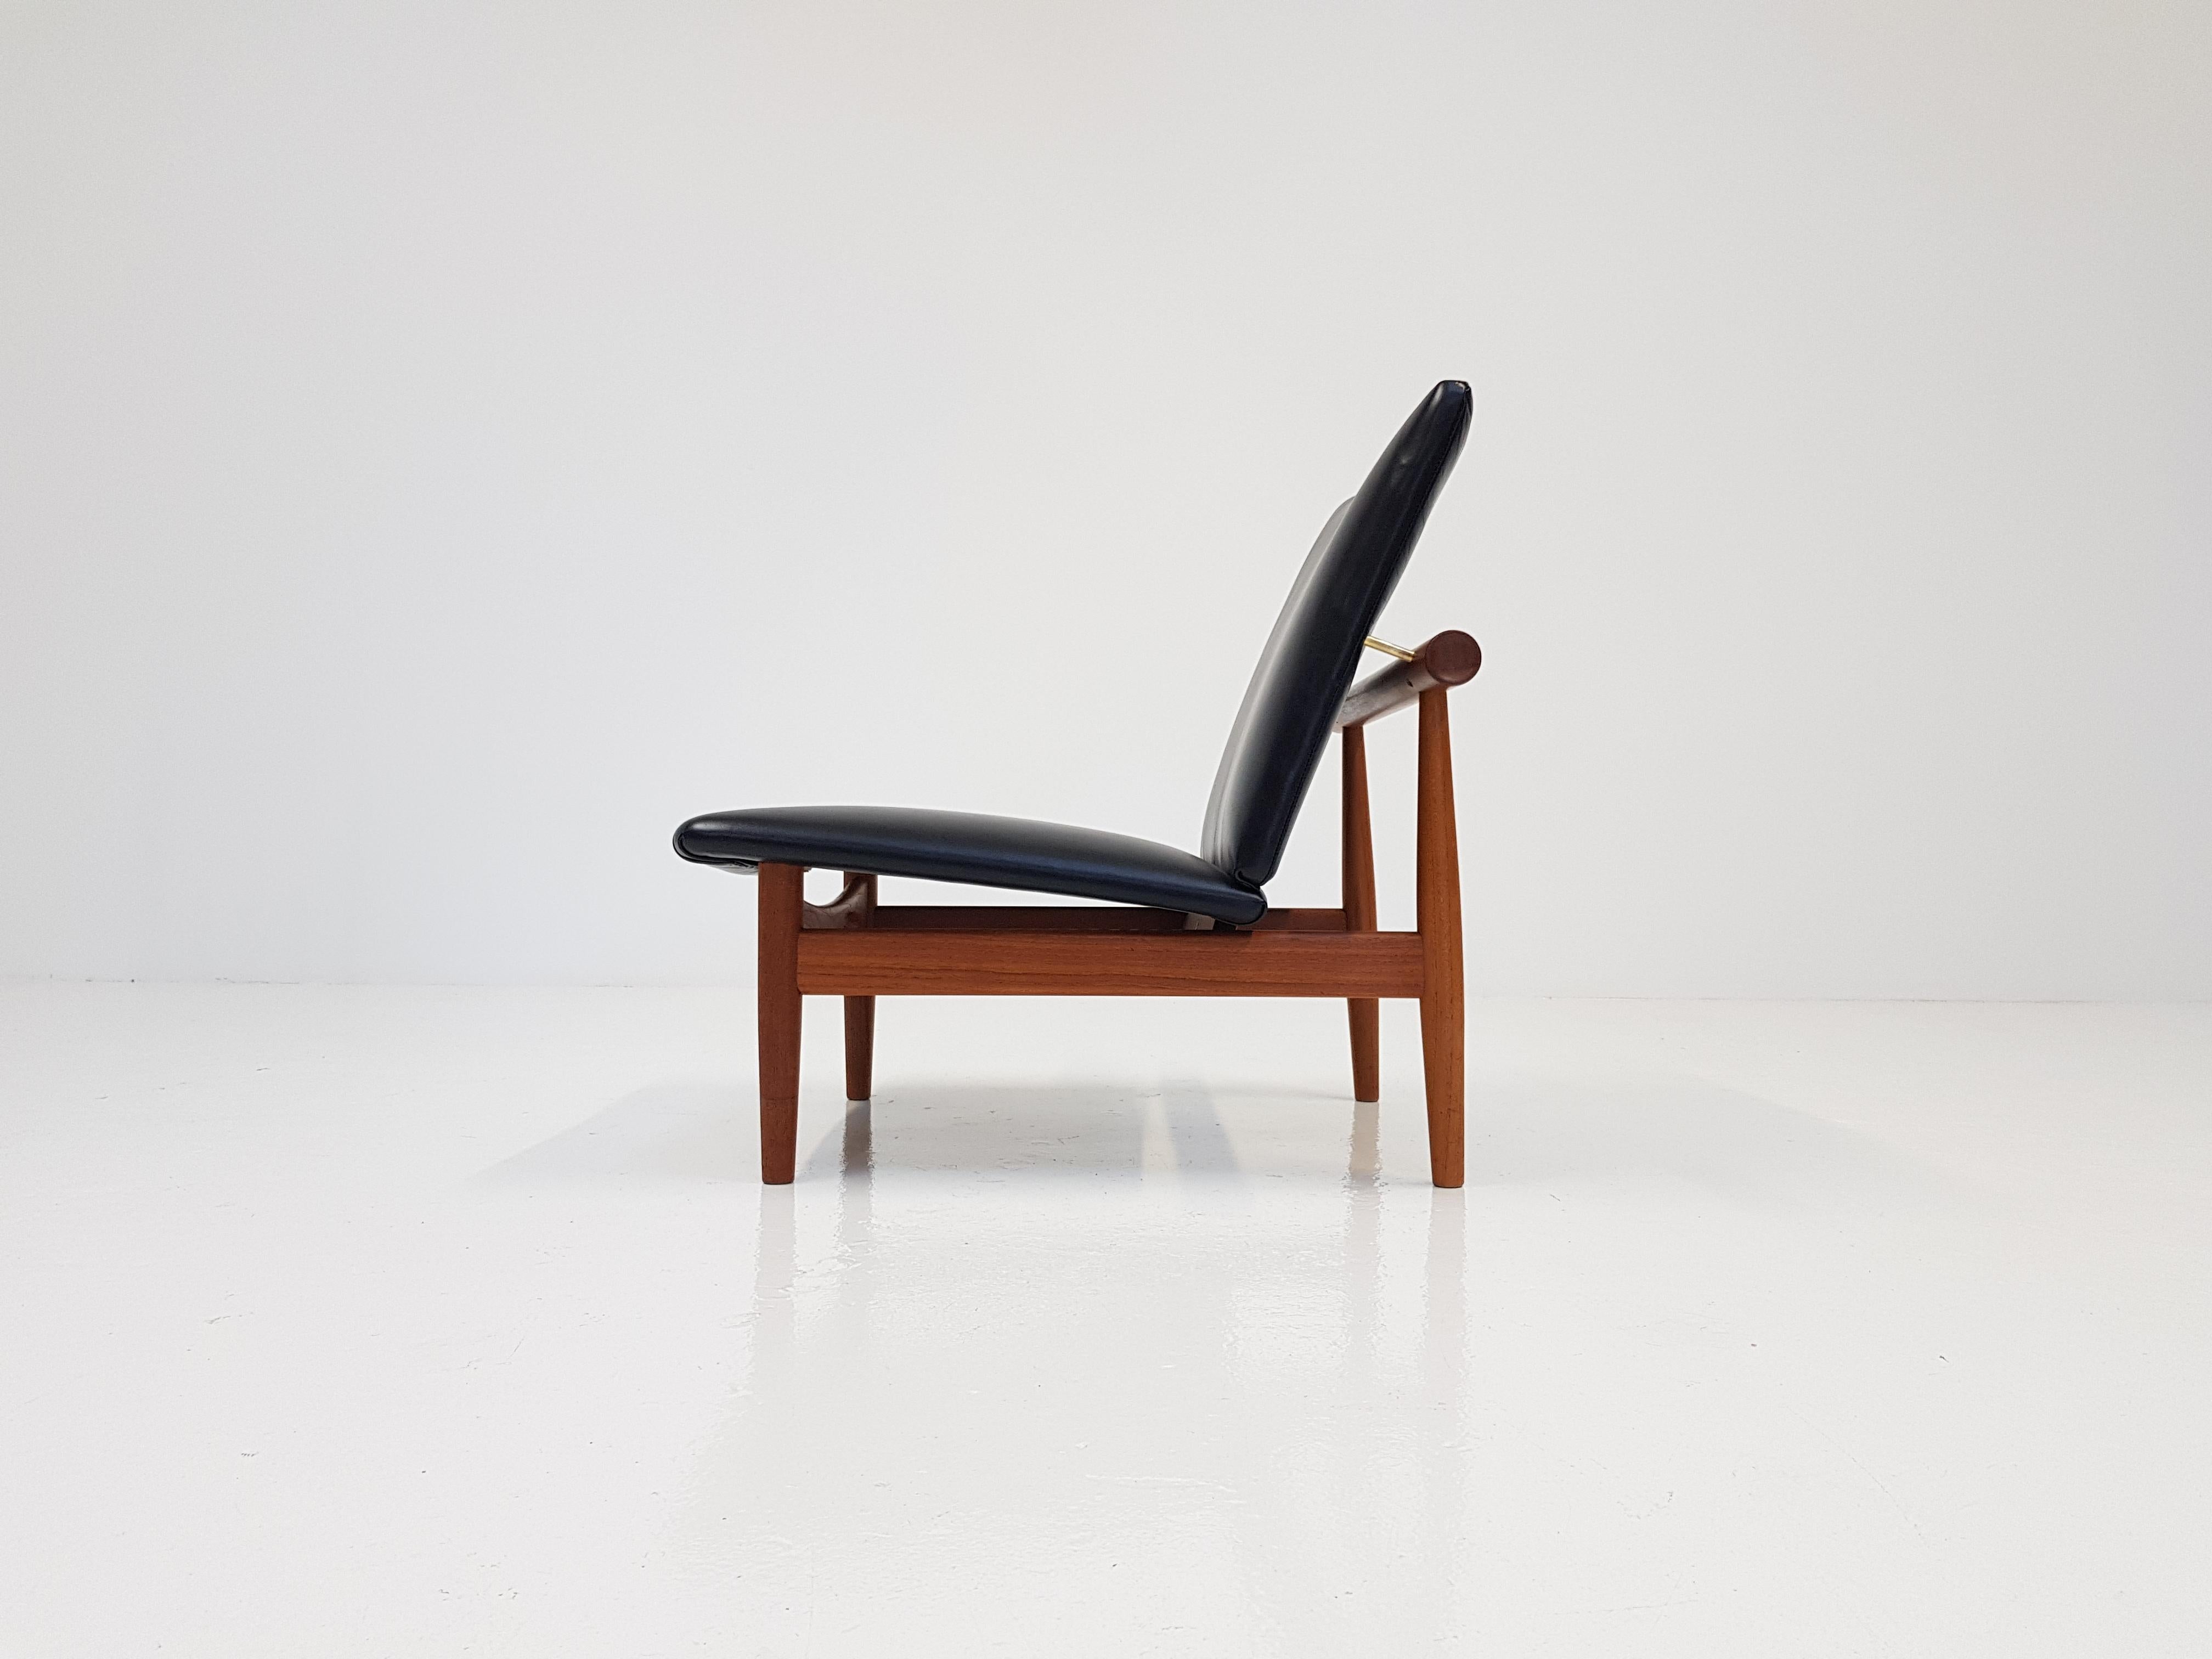 A Model 137 lounge chair by Danish icon Finn Juhl for France & Daverkosen, also called the Japan chair as inspiration was taken from the Miyajima water gate in Hatsukaichi, Hiroshima.

A beautiful design which is one of Finn Juhl's most sought